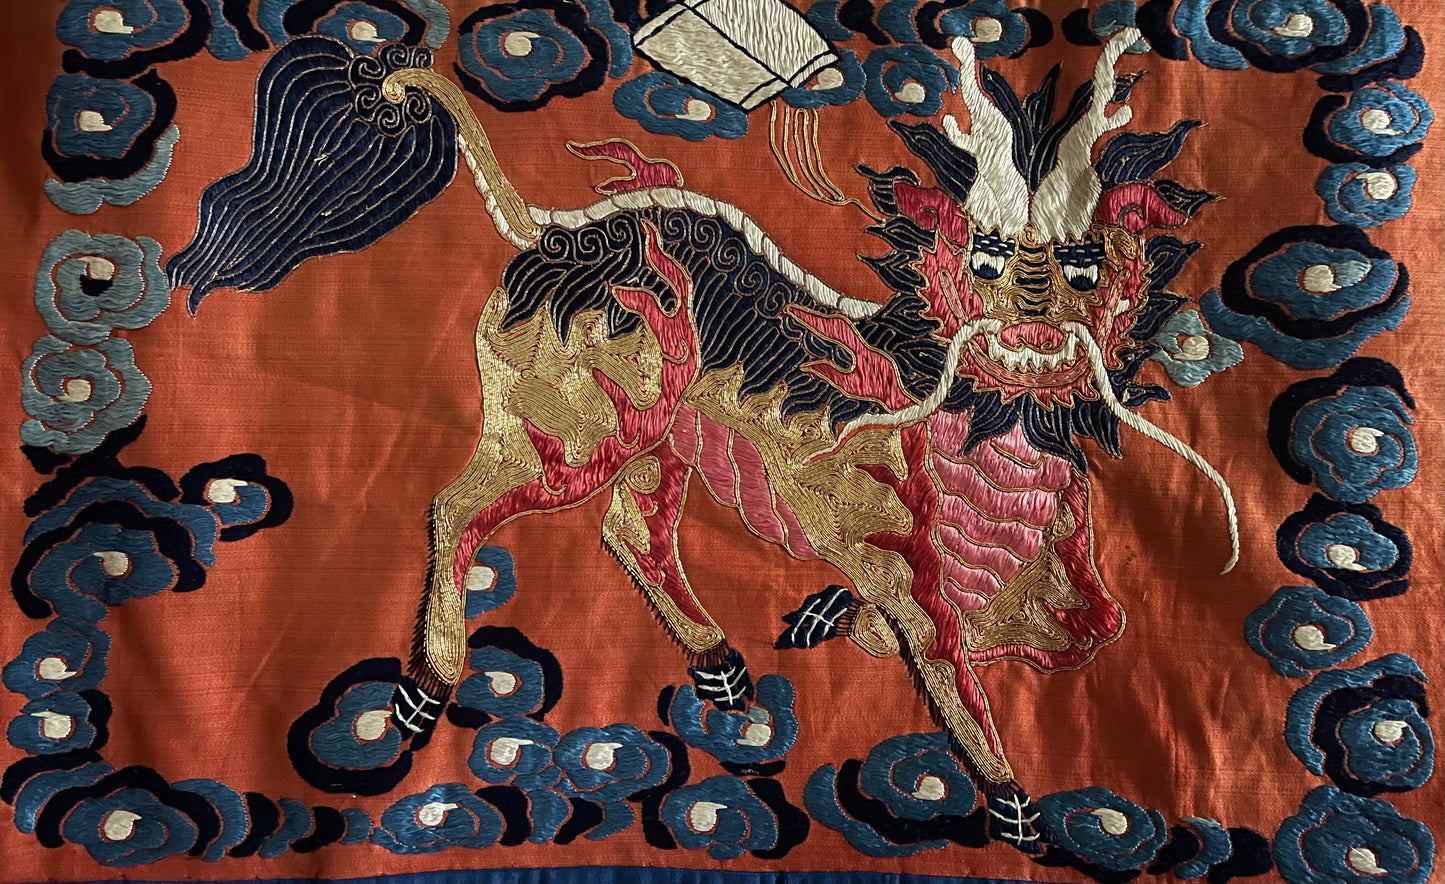 An antique Chinese wall hanging - embroidery on silk